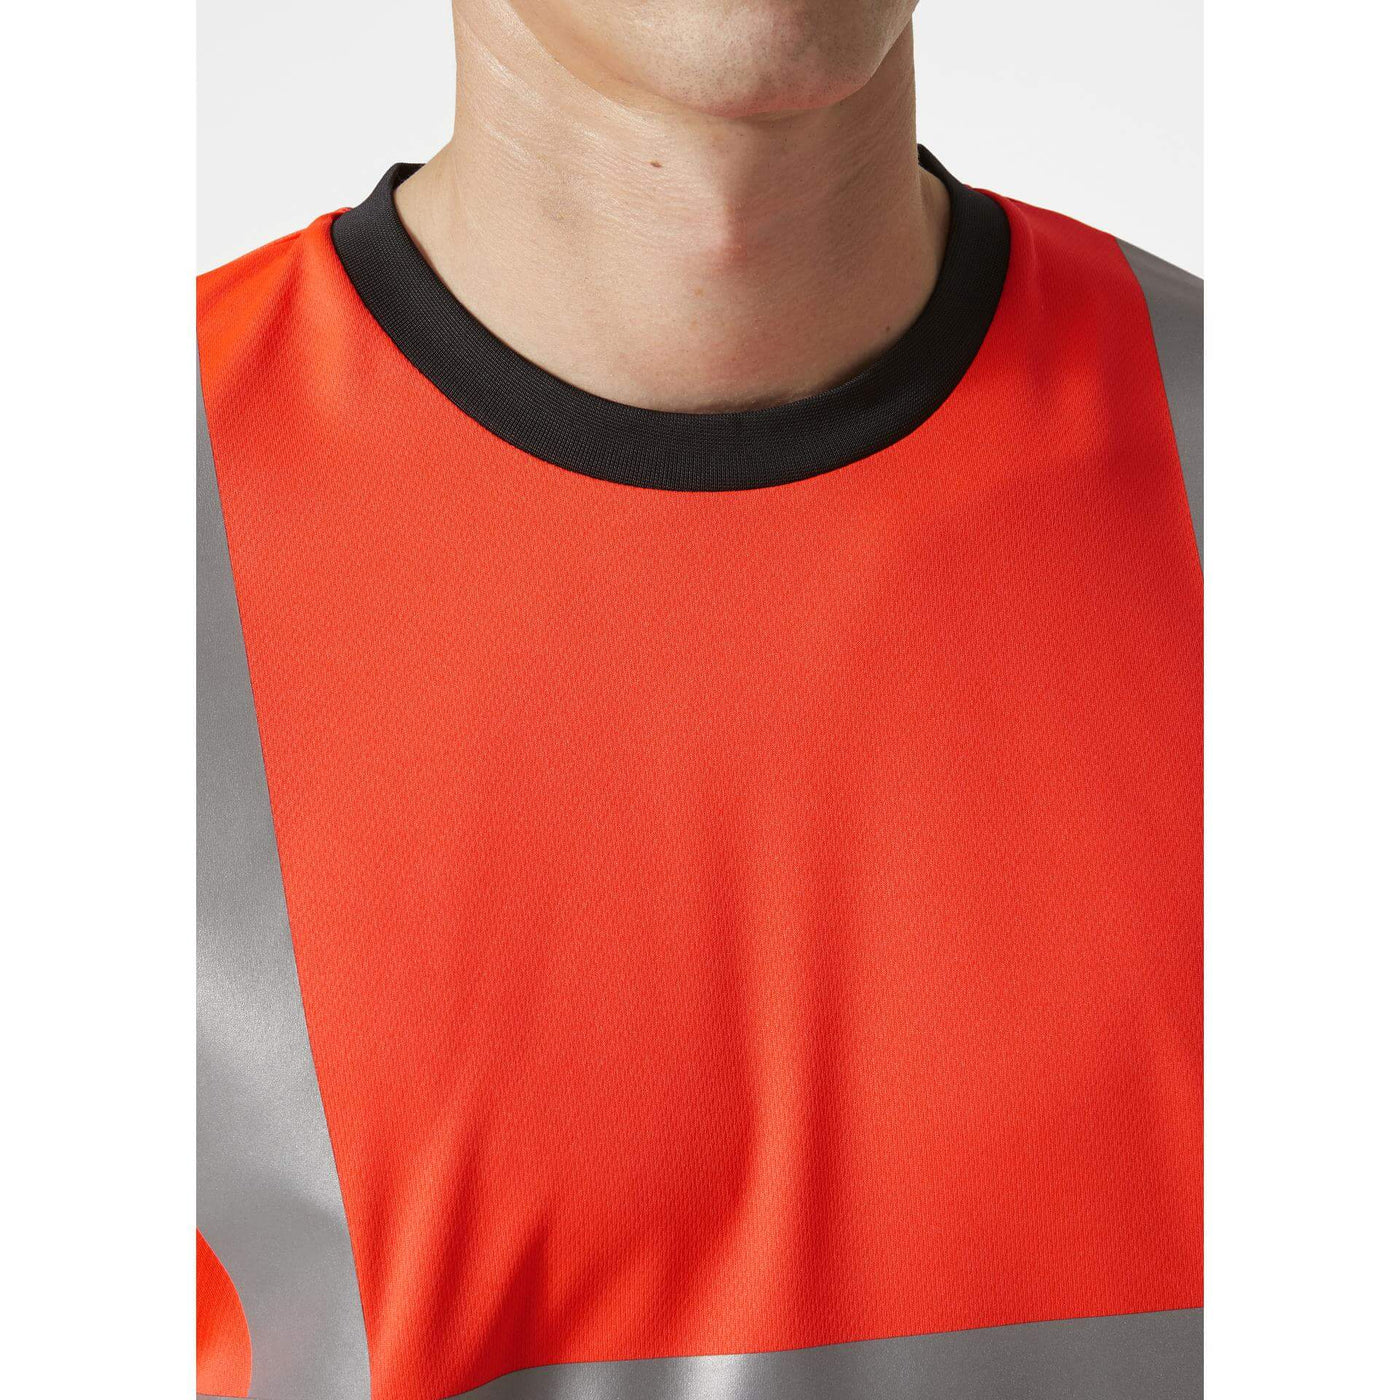 Helly Hansen Addvis Hi-Vis T-Shirt Class 1 Red/Ebony Feature 2#colour_red-ebony